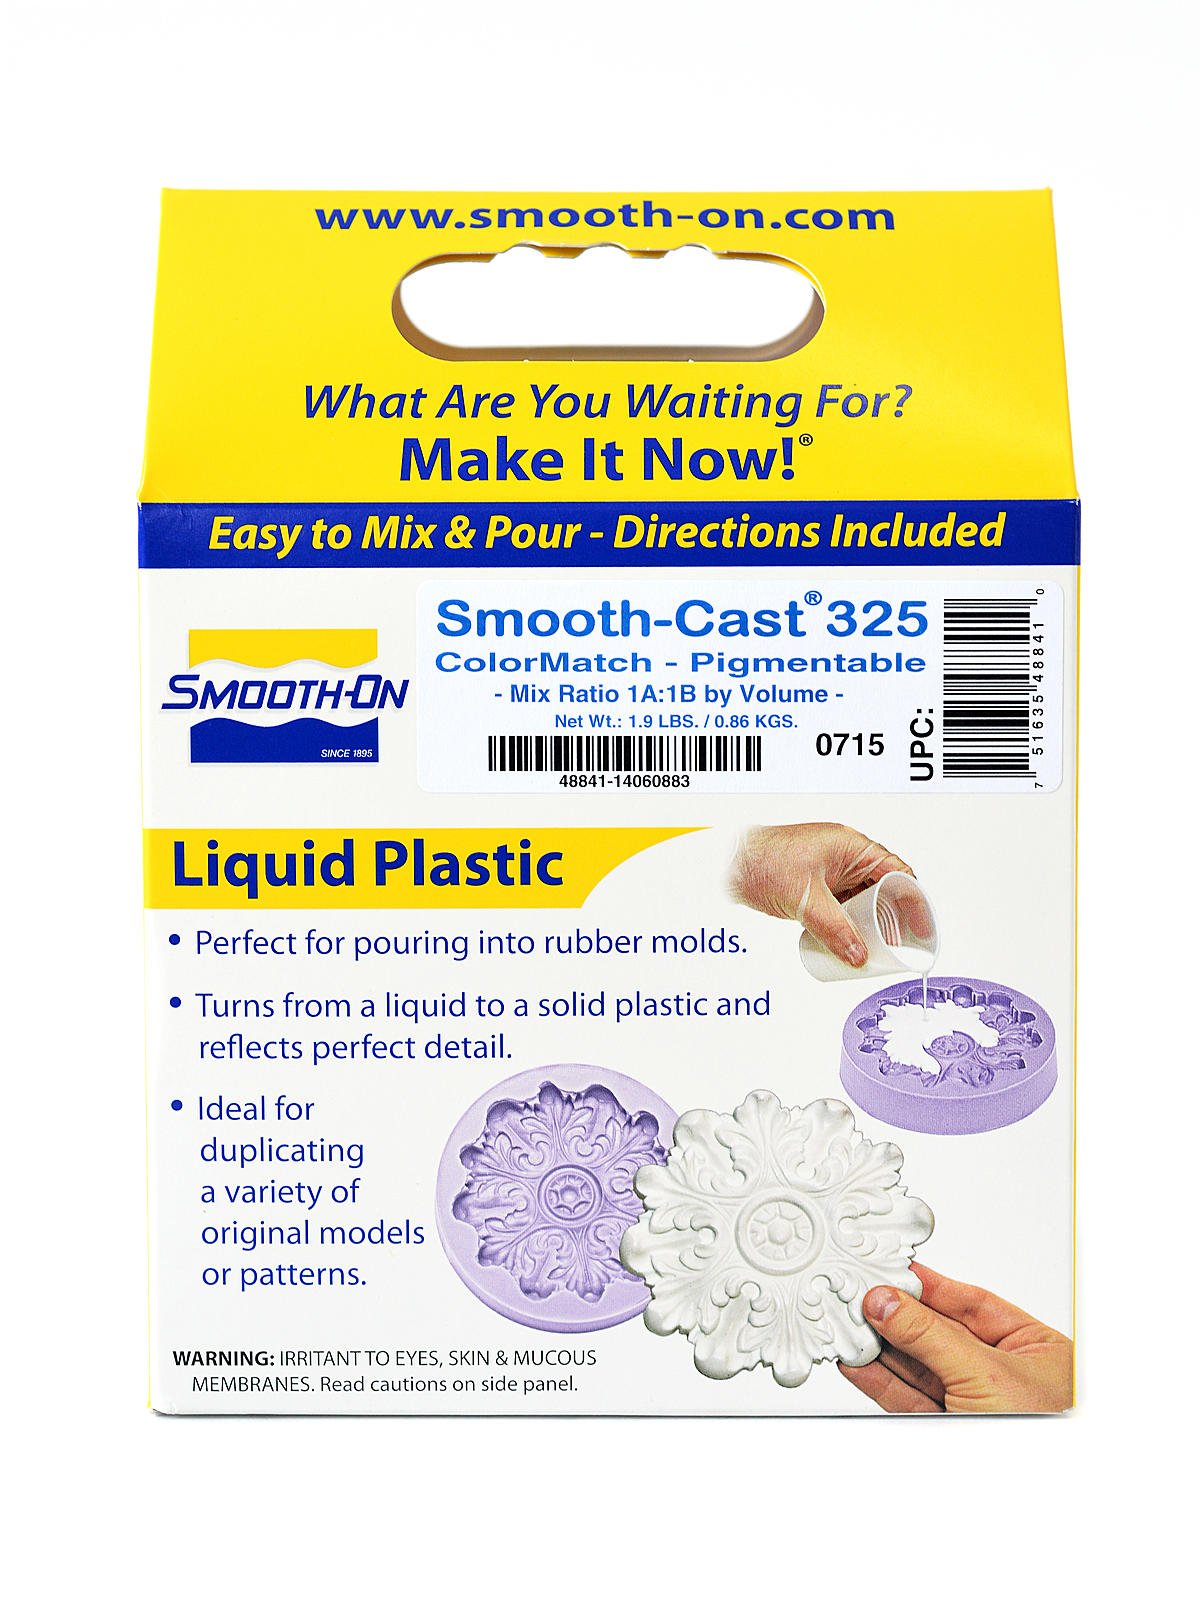 Smooth-On - Smooth-Cast 325 ColorMatch Liquid Plastic Compound